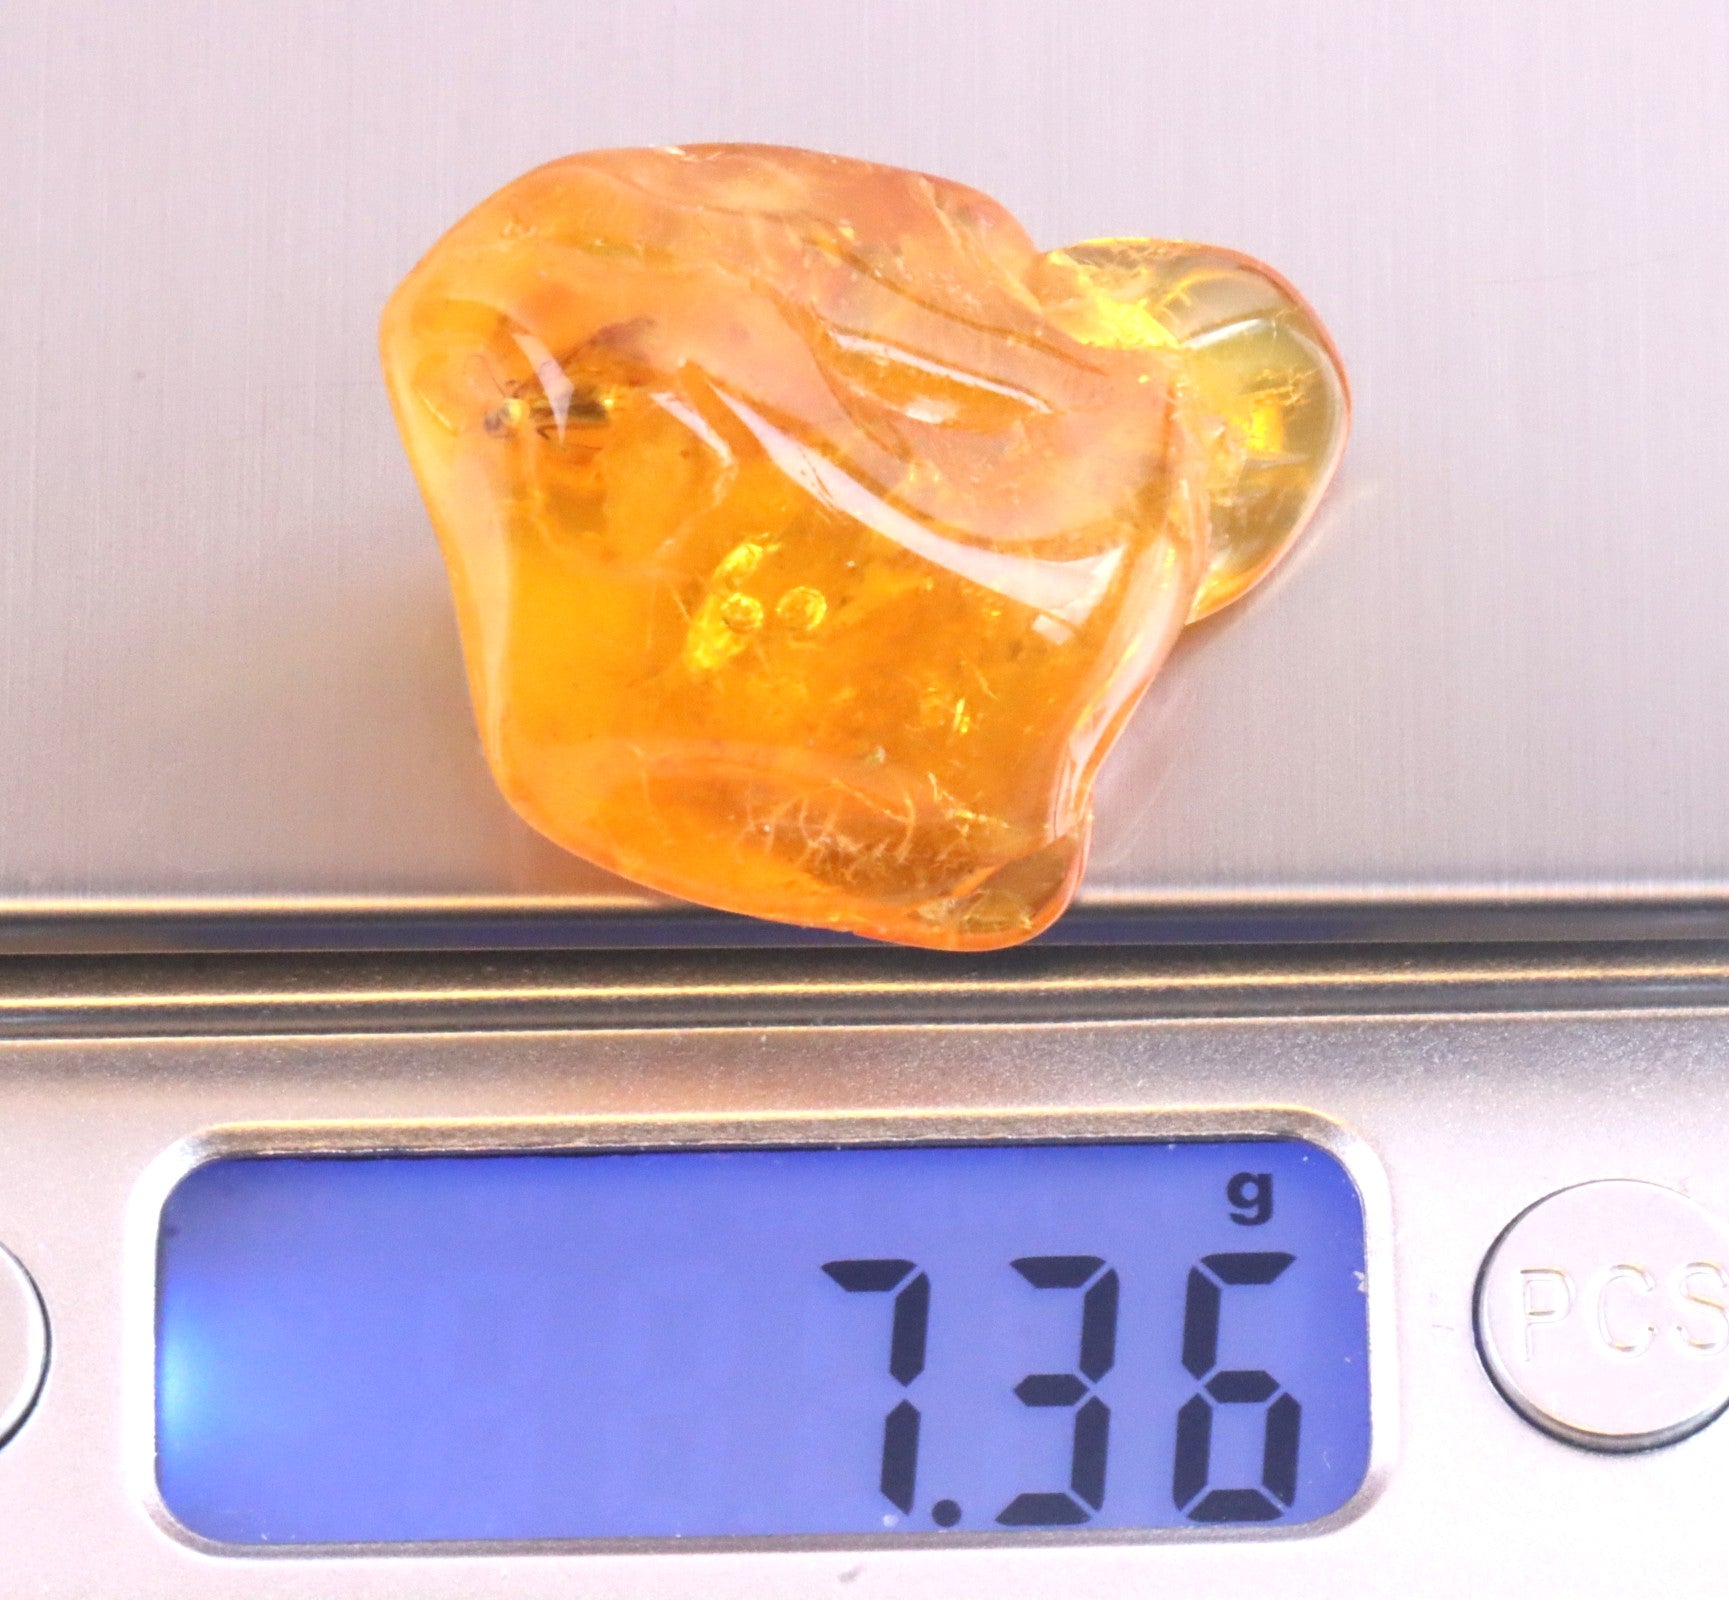 40 million year old Amber With Insect Inclusion